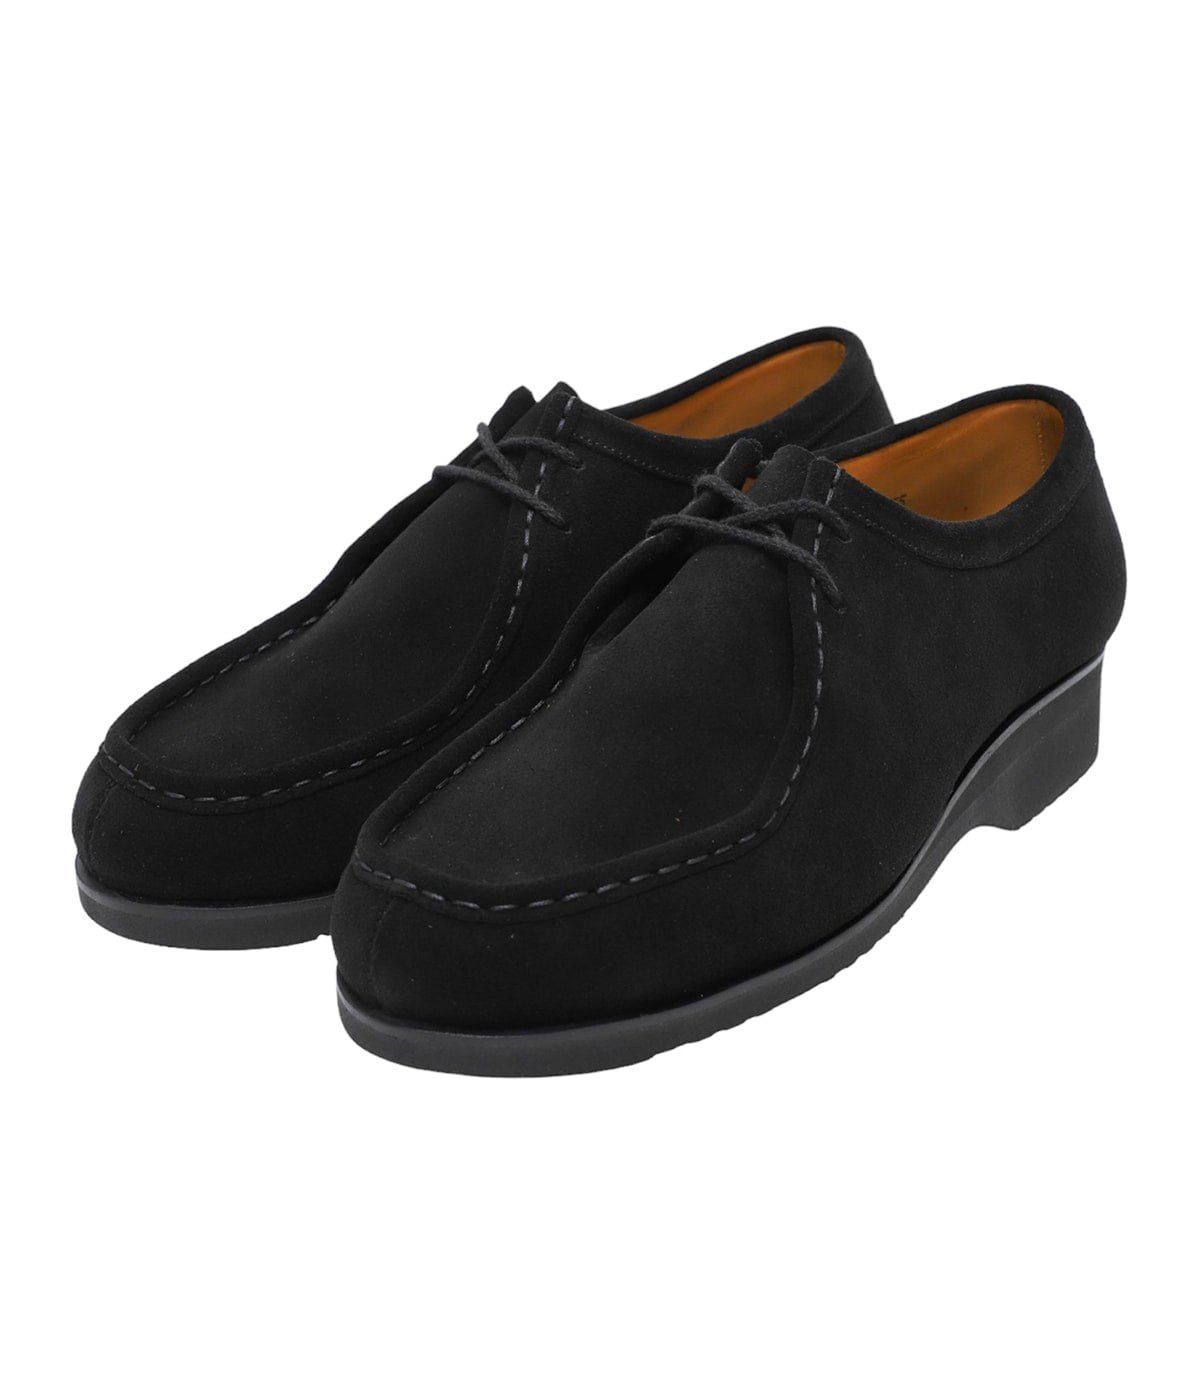 Tirolean shoes_Suede leather | FOOTWORKS(フットワークス ...